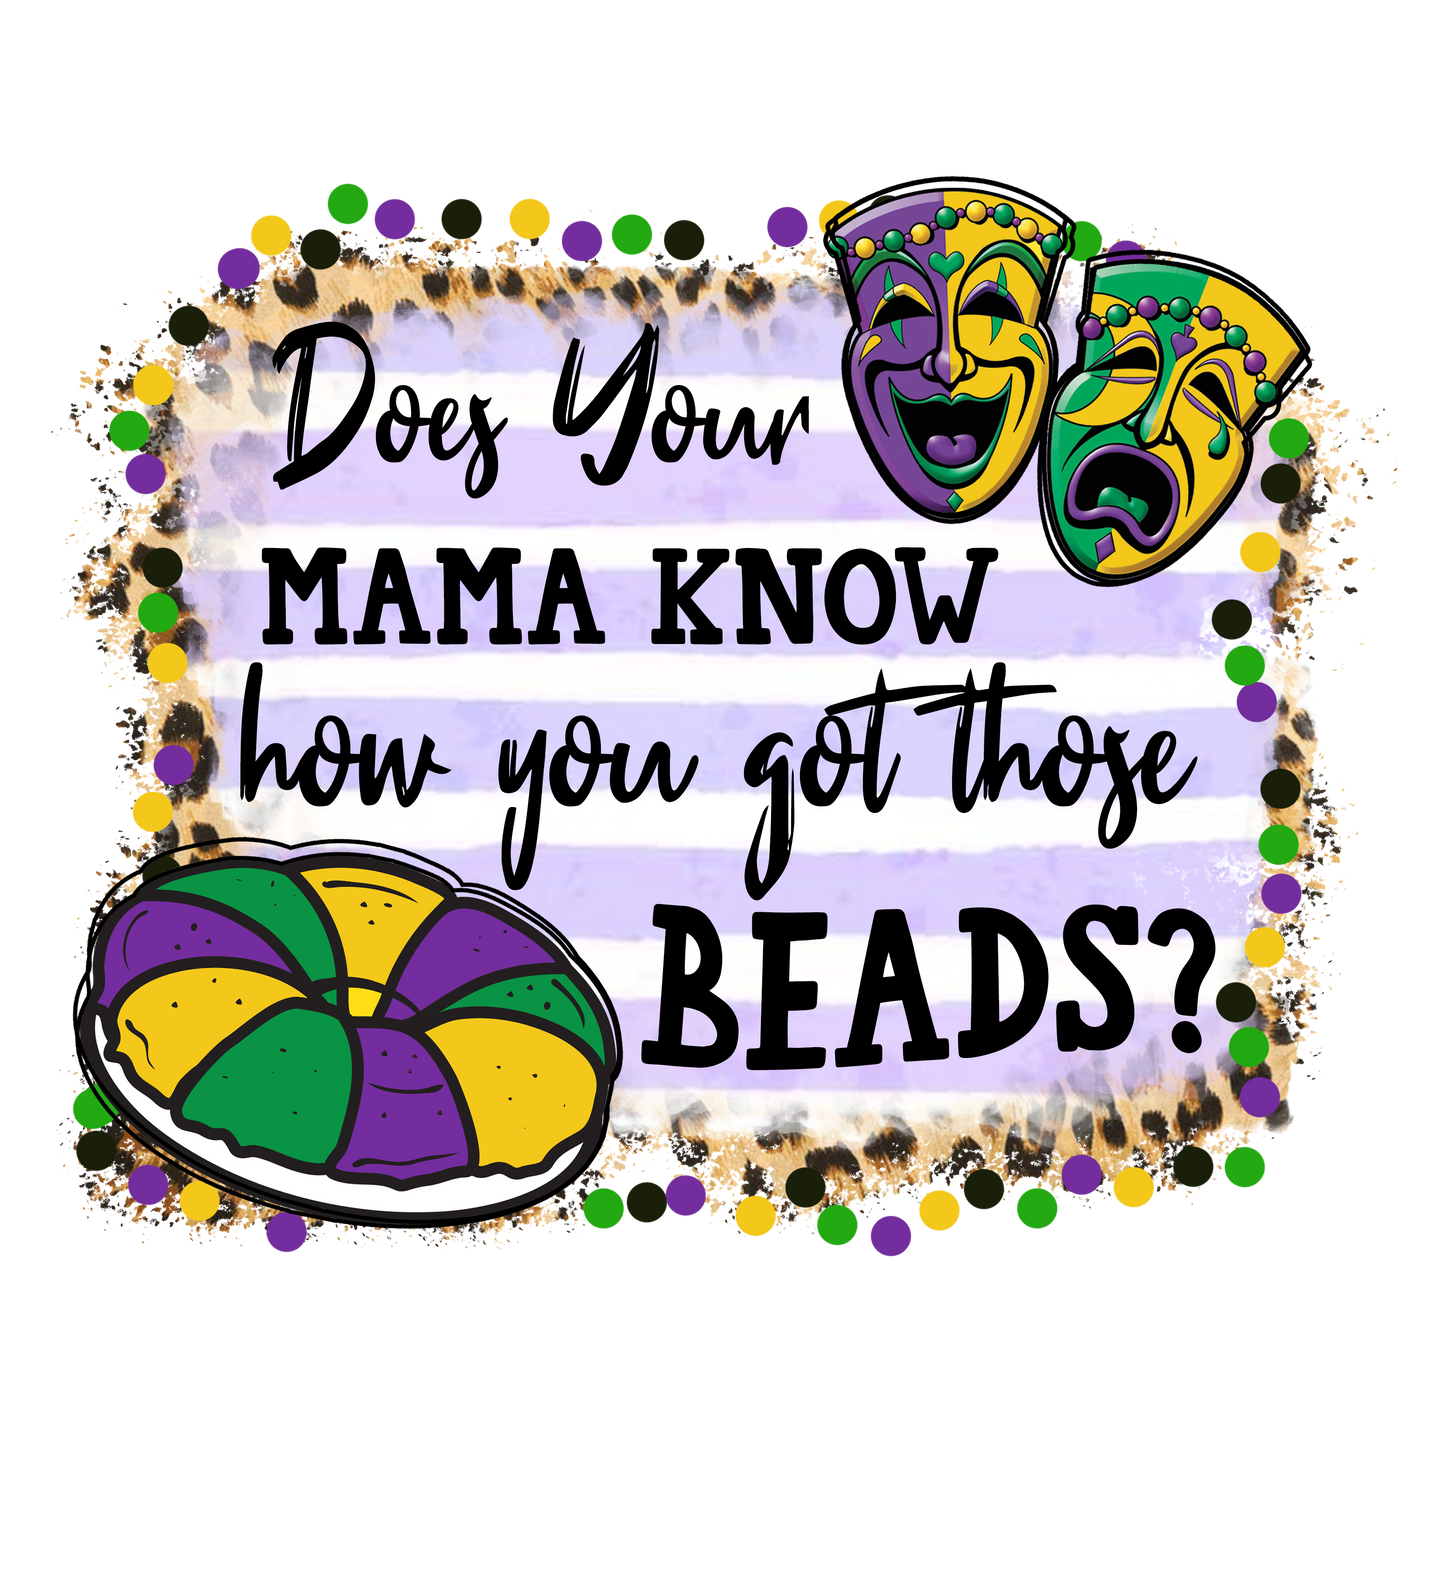 Does Your Mama Know- Mardi Gras T-shirt Transfer